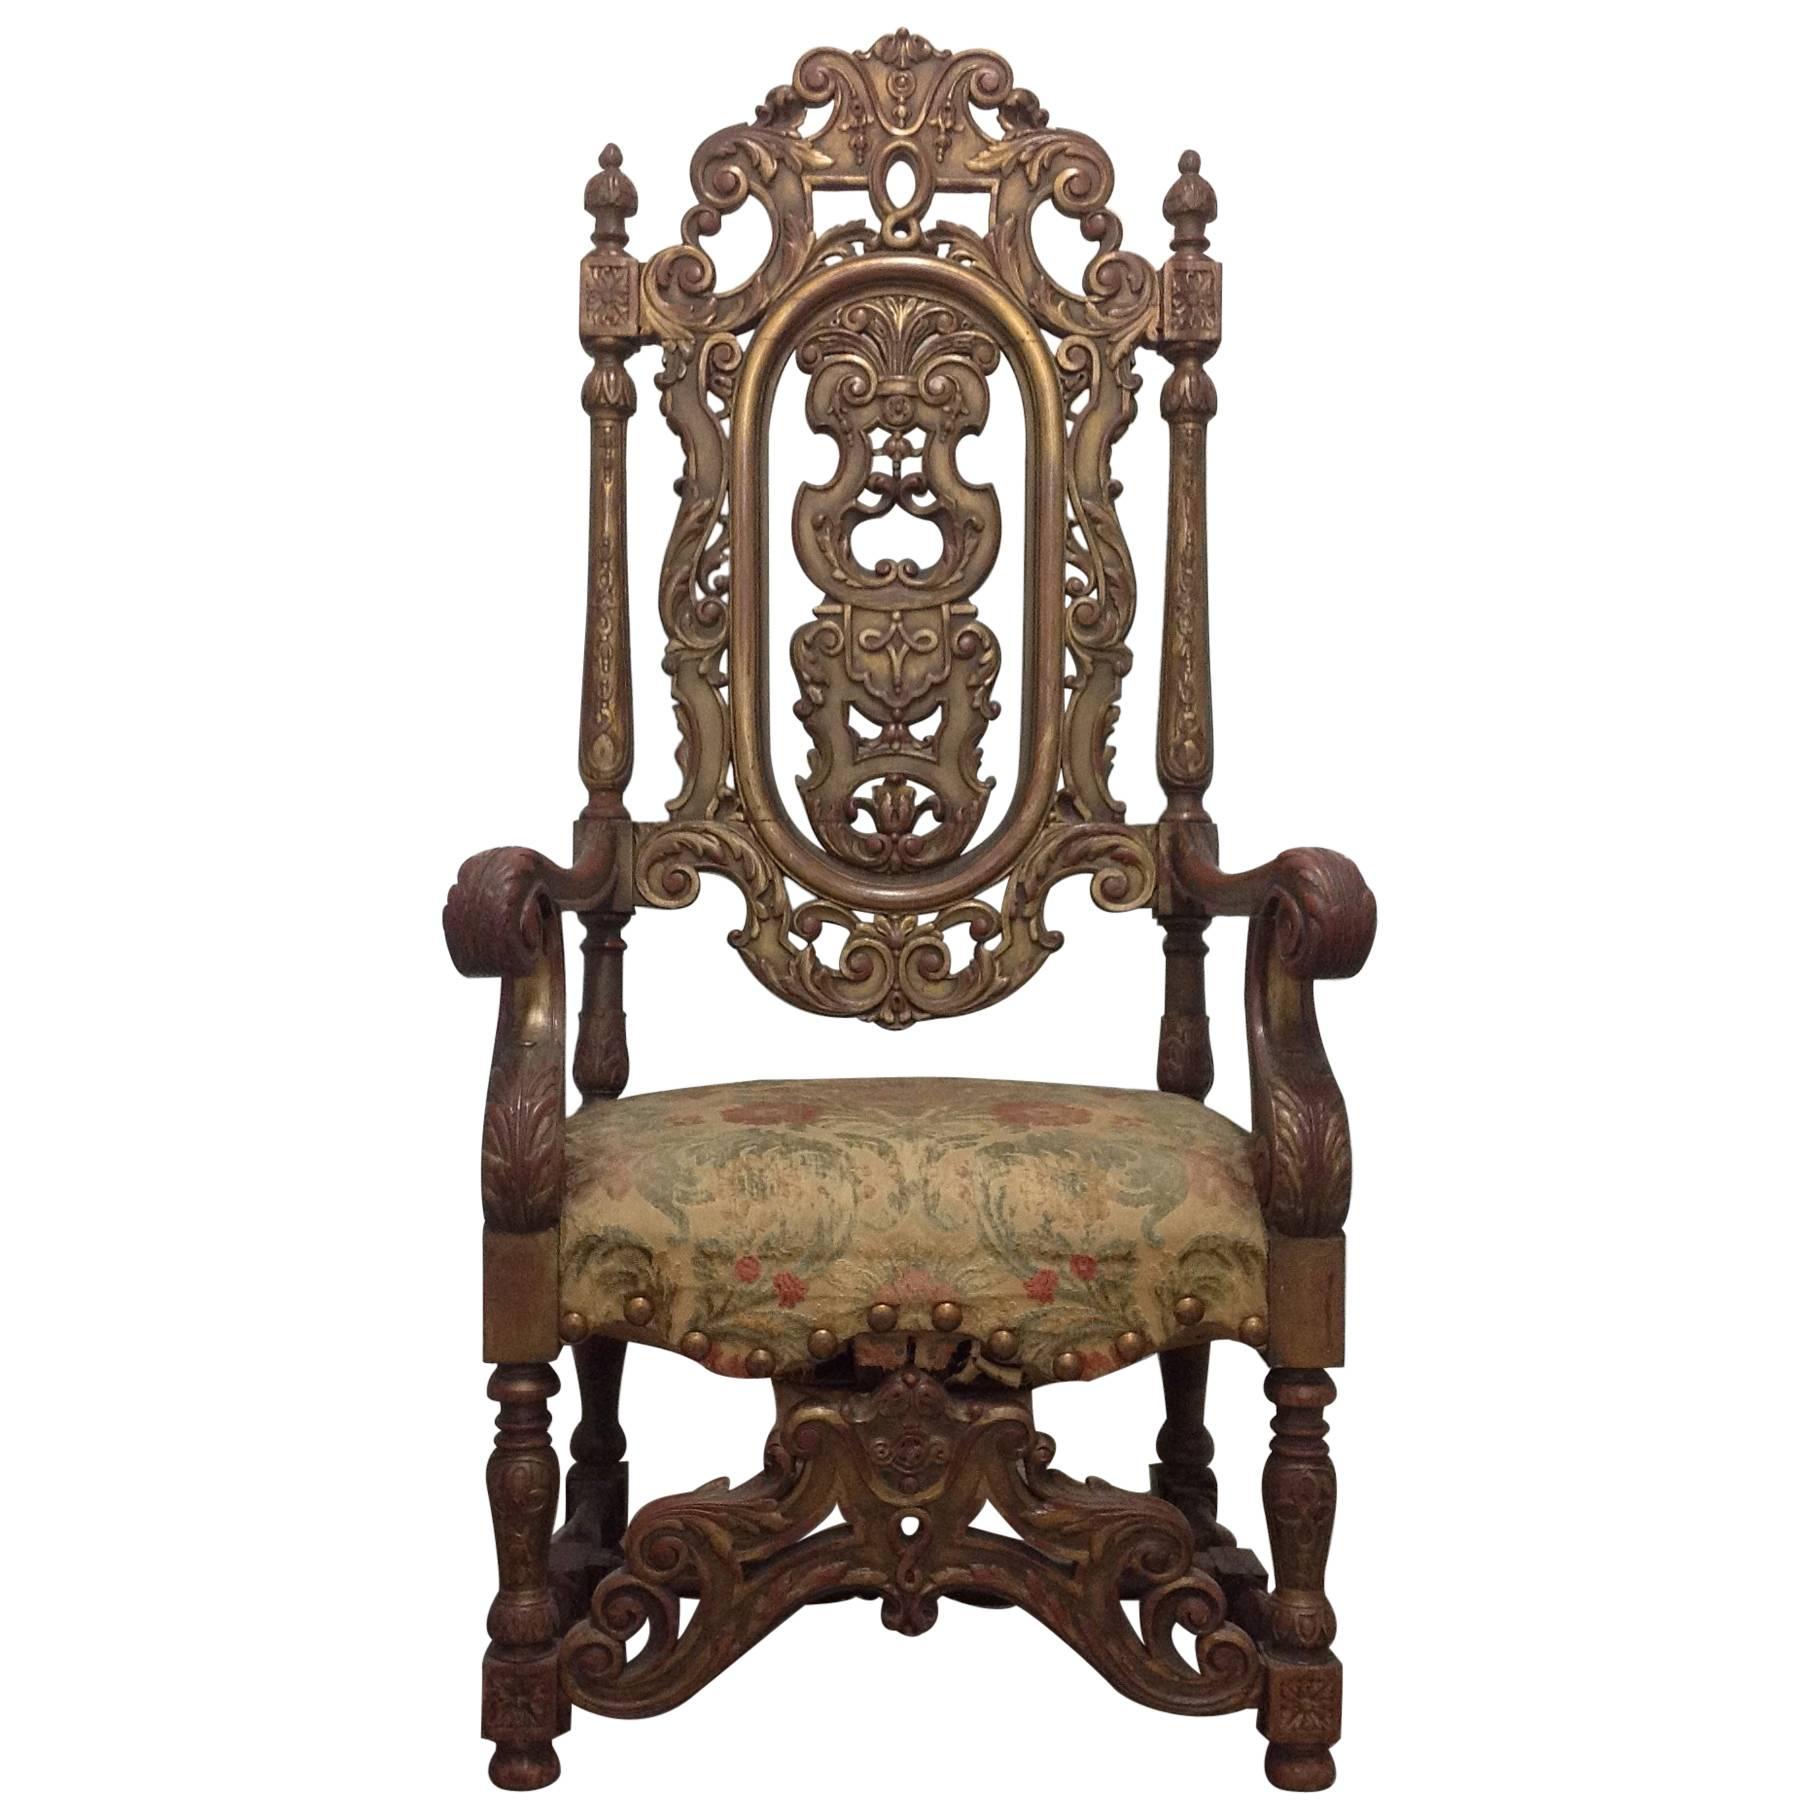 Heavily carved wood late 19th century Italian palatial and regal armchair with its original antique floral velvet brocade tapestry seat covering. Very faded on the top of the seat, the antique tapestry still has vibrancy in the front and back and is